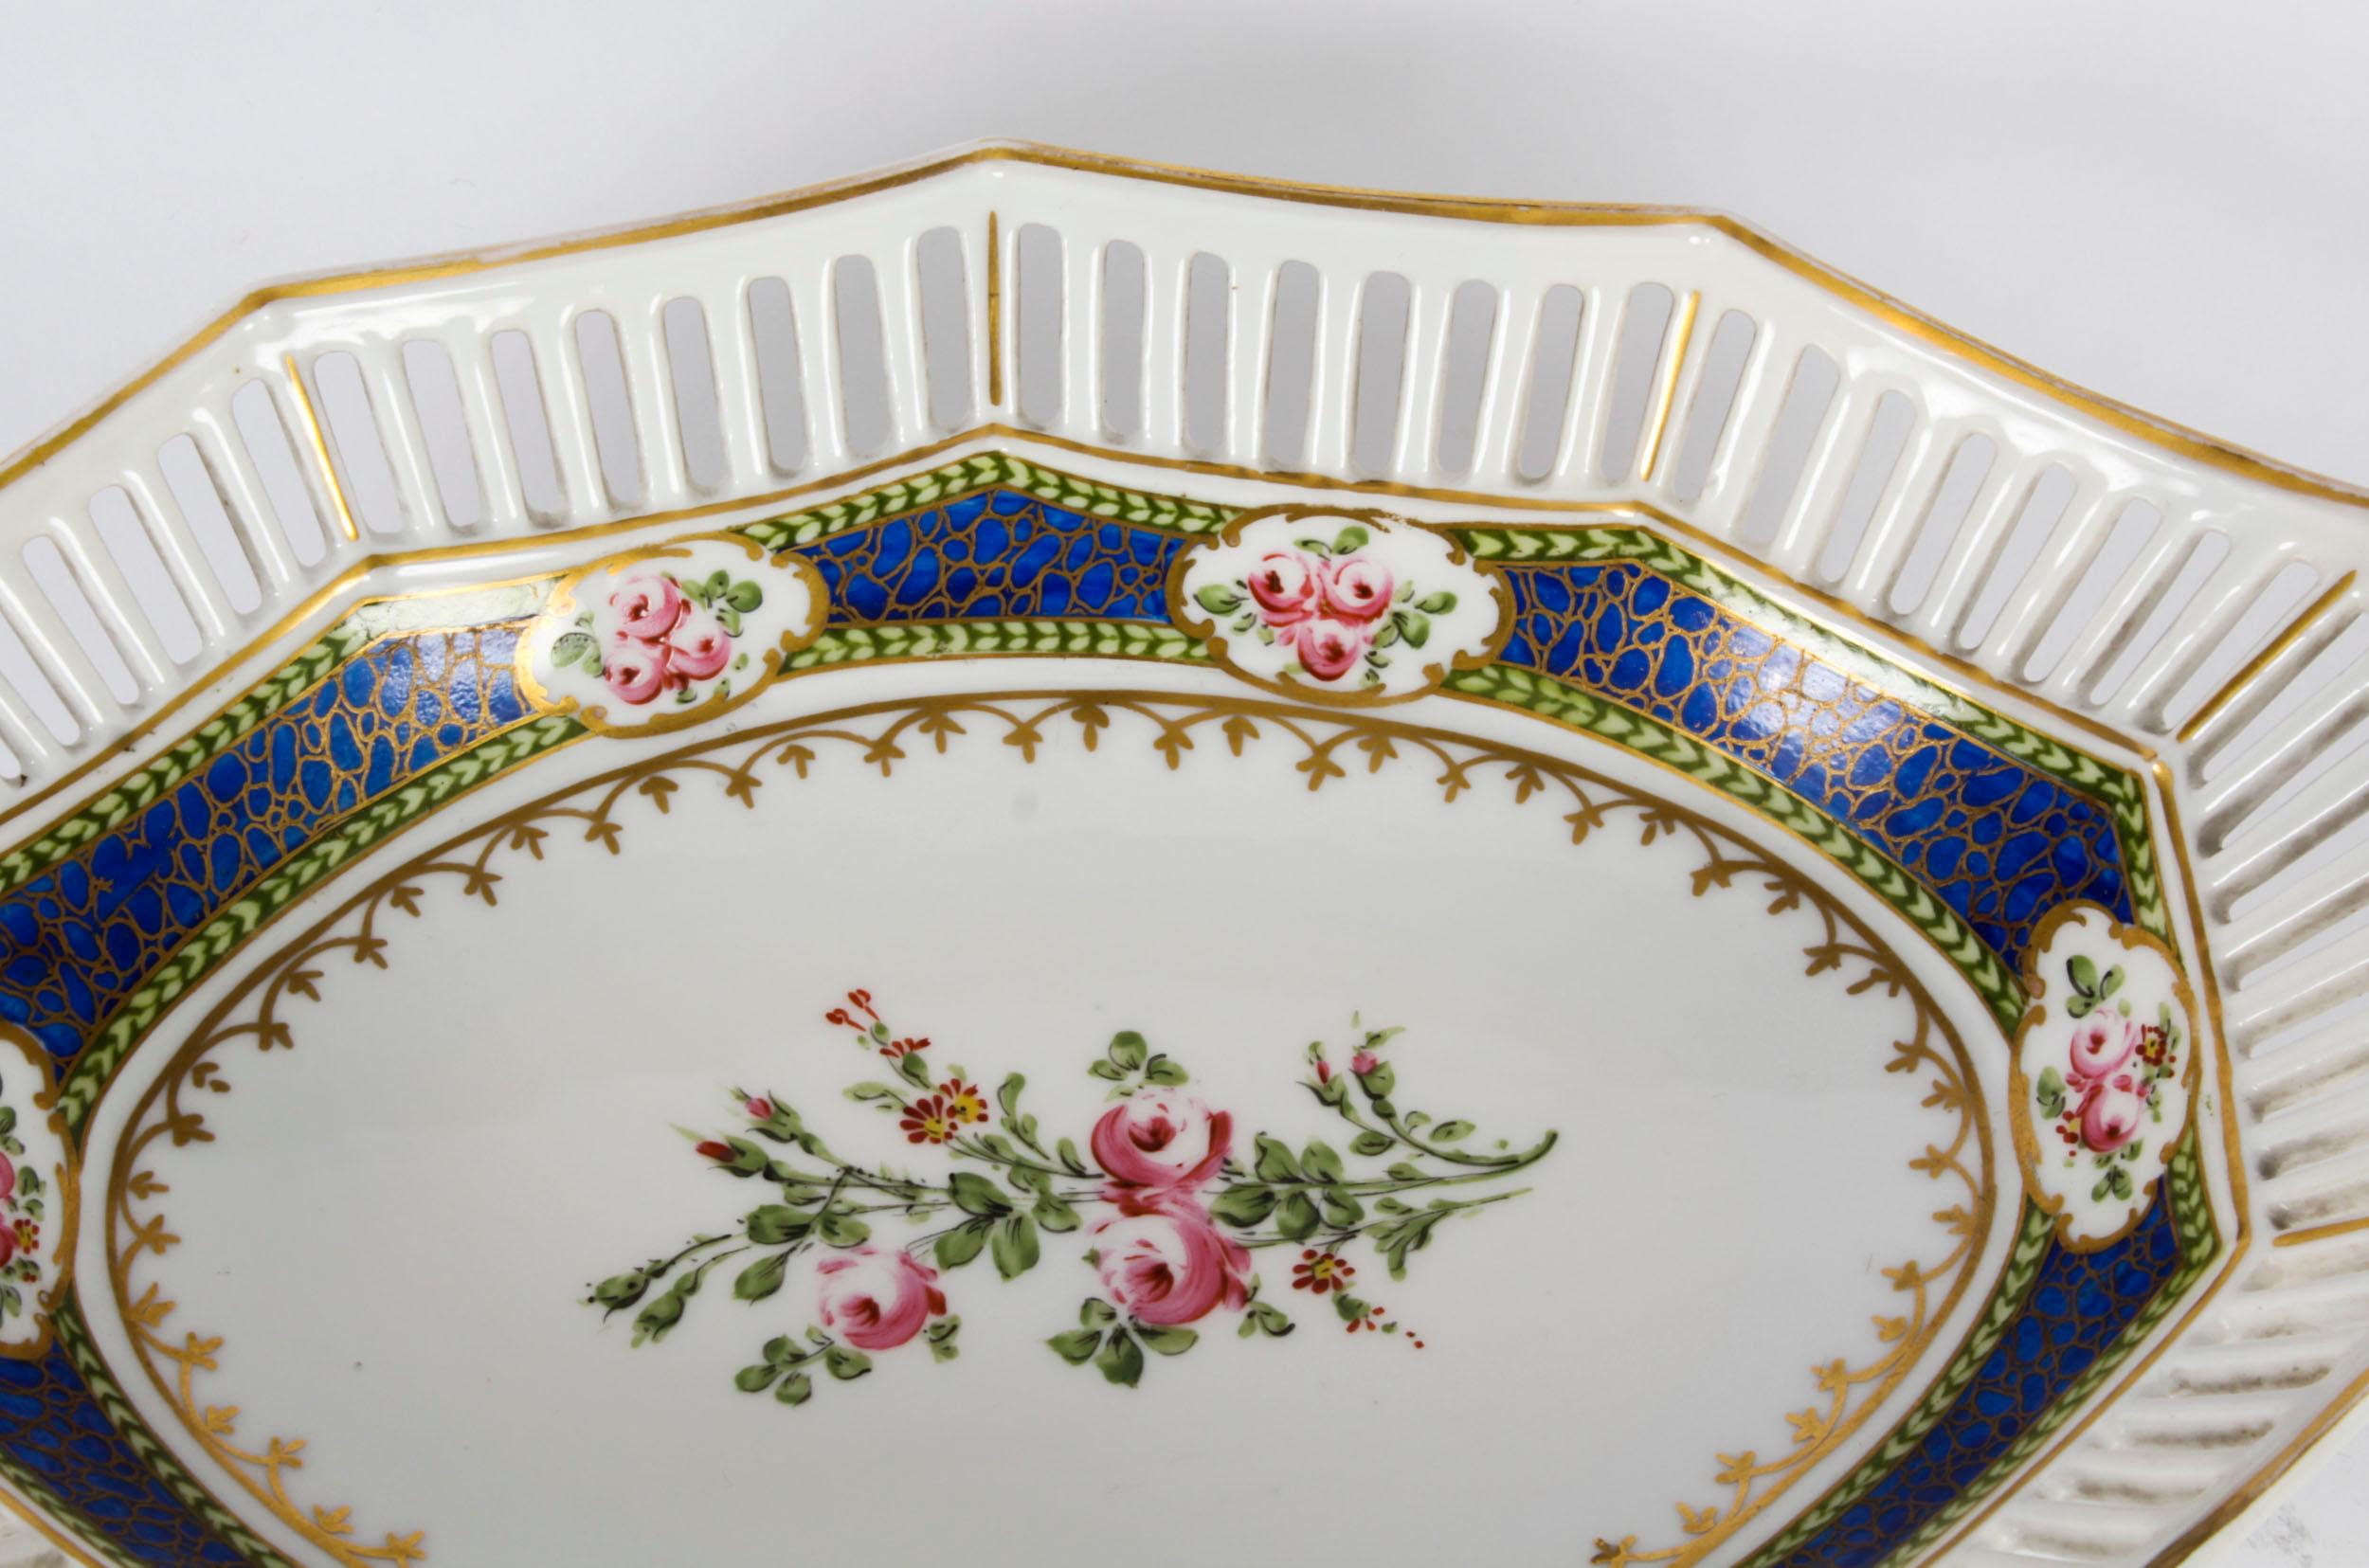 Antique French Sevres Oval Porcelain Dish Late 19th Century For Sale 1